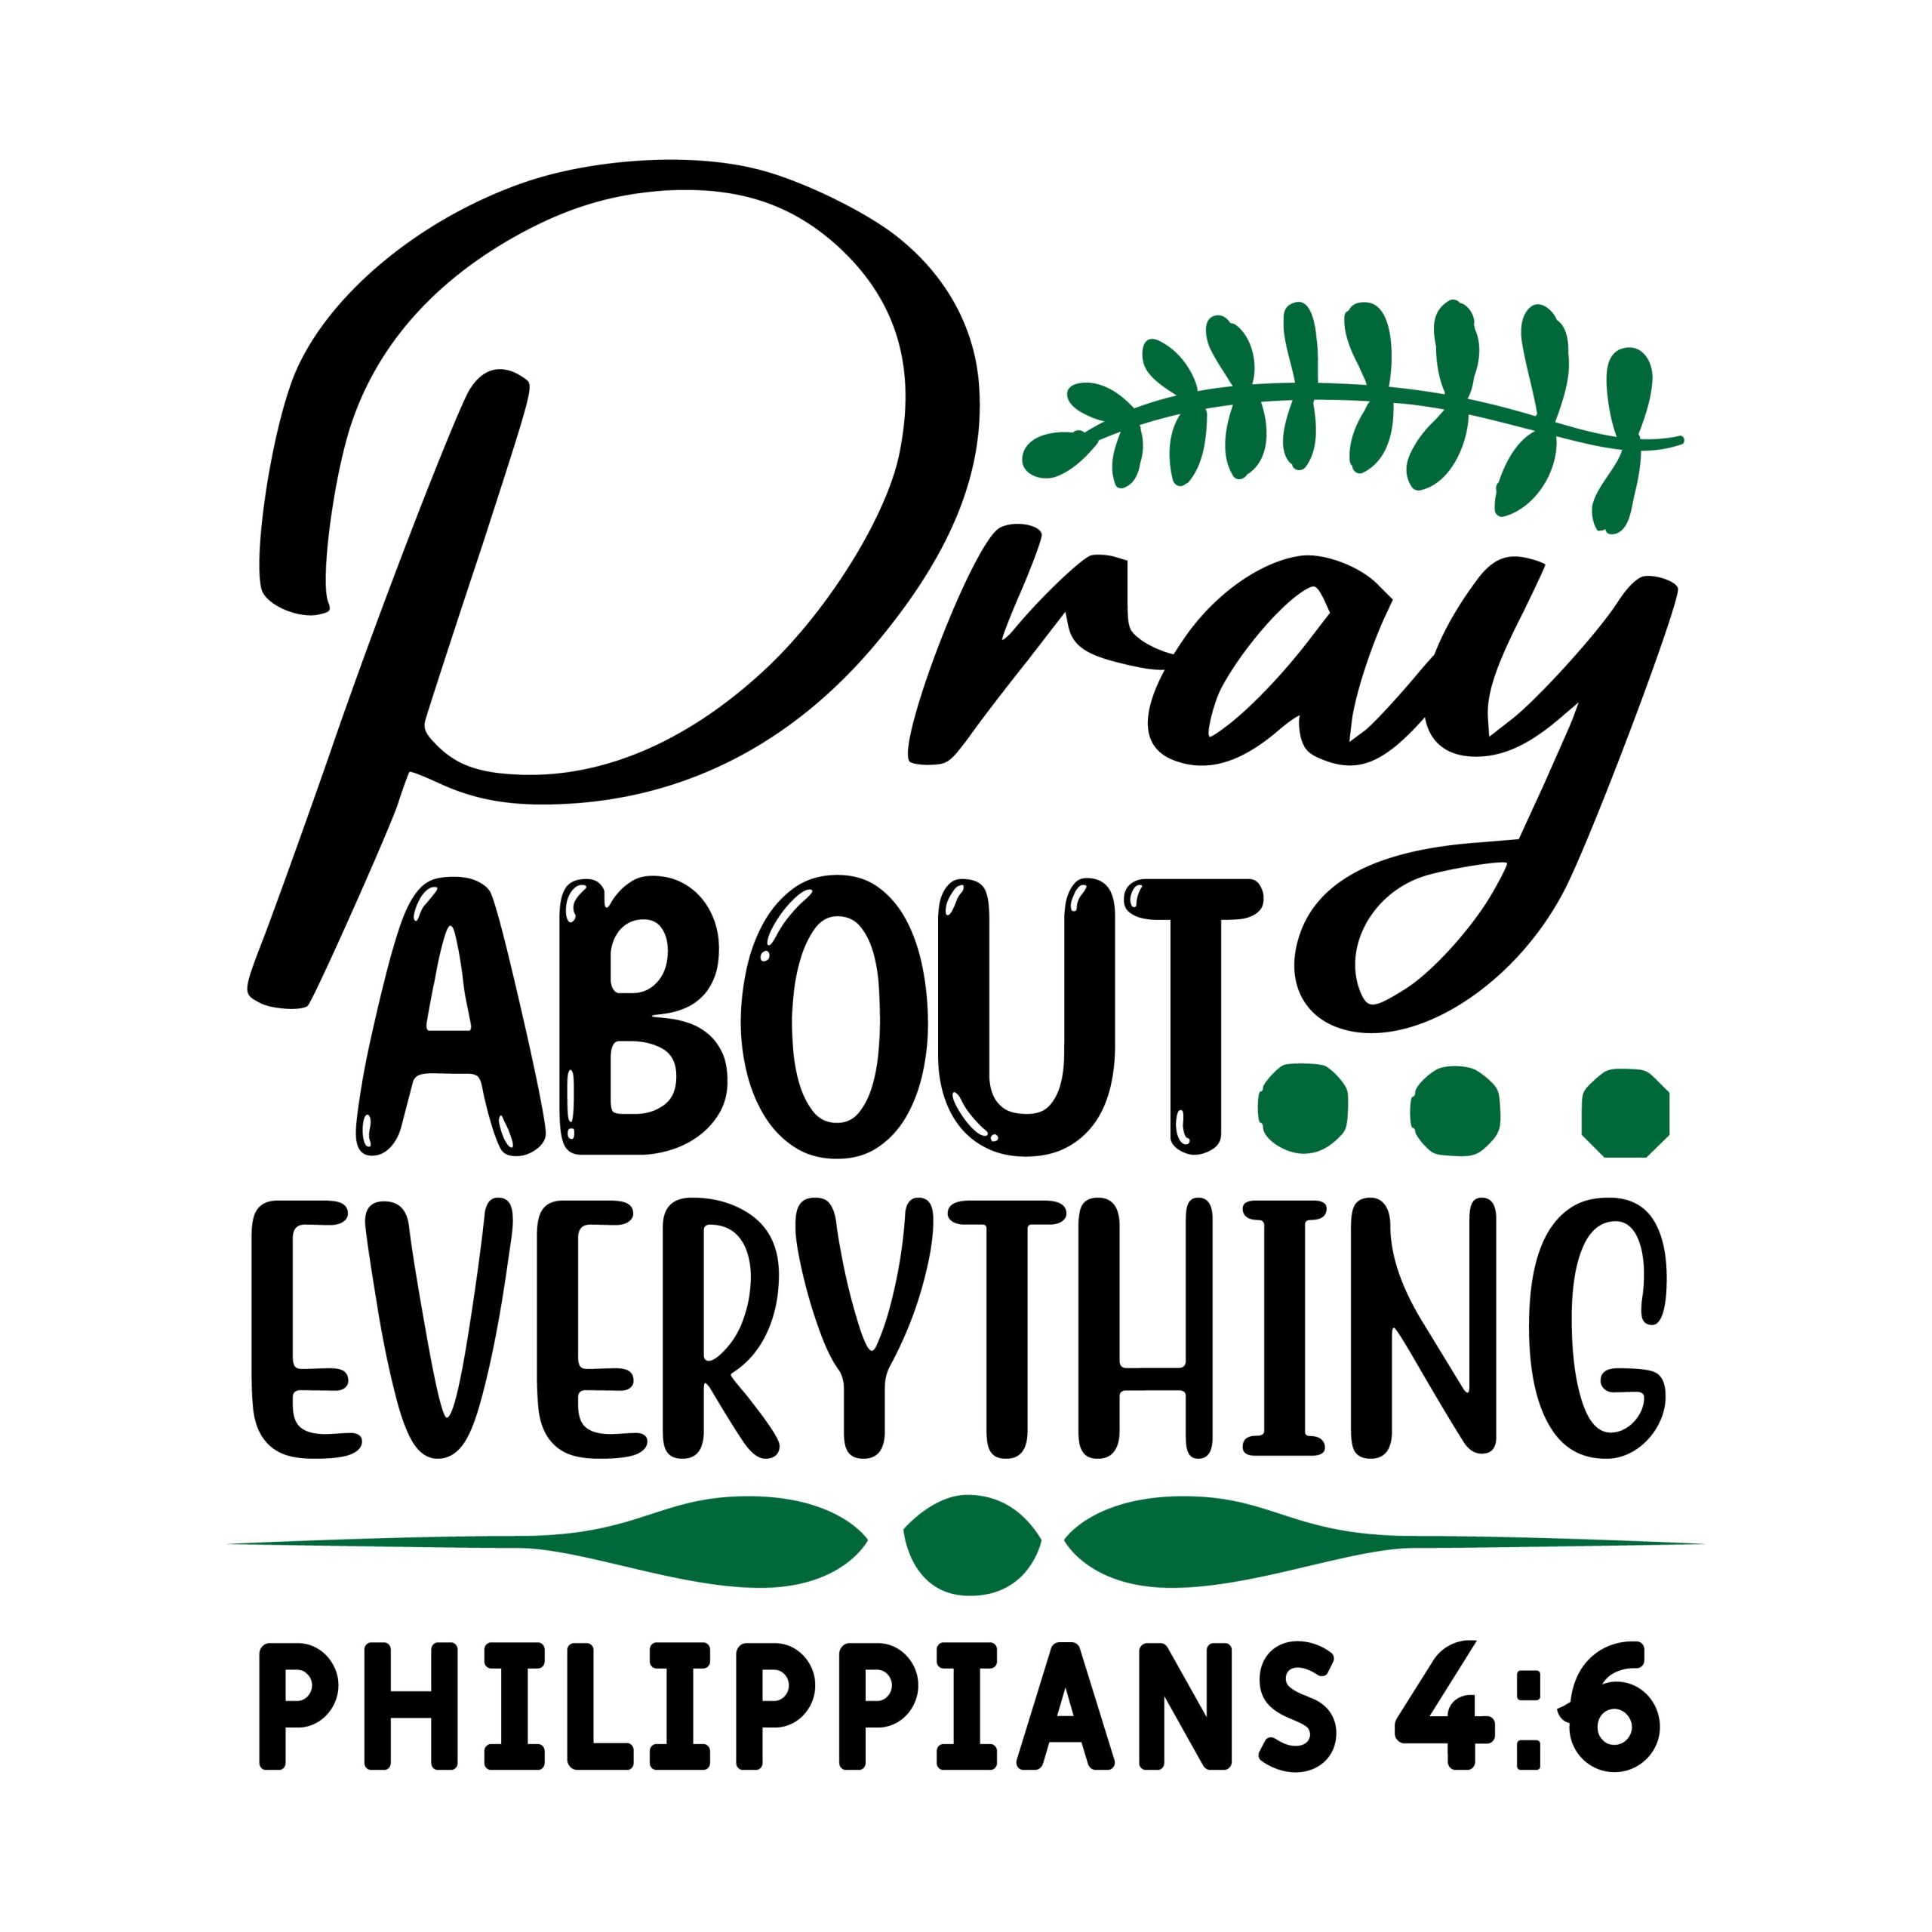 Pray about everything philippians 4:6, bible verses, scripture verses, svg files, passages, sayings, cricut designs, silhouette, embroidery, bundle, free cut files, design space, vector